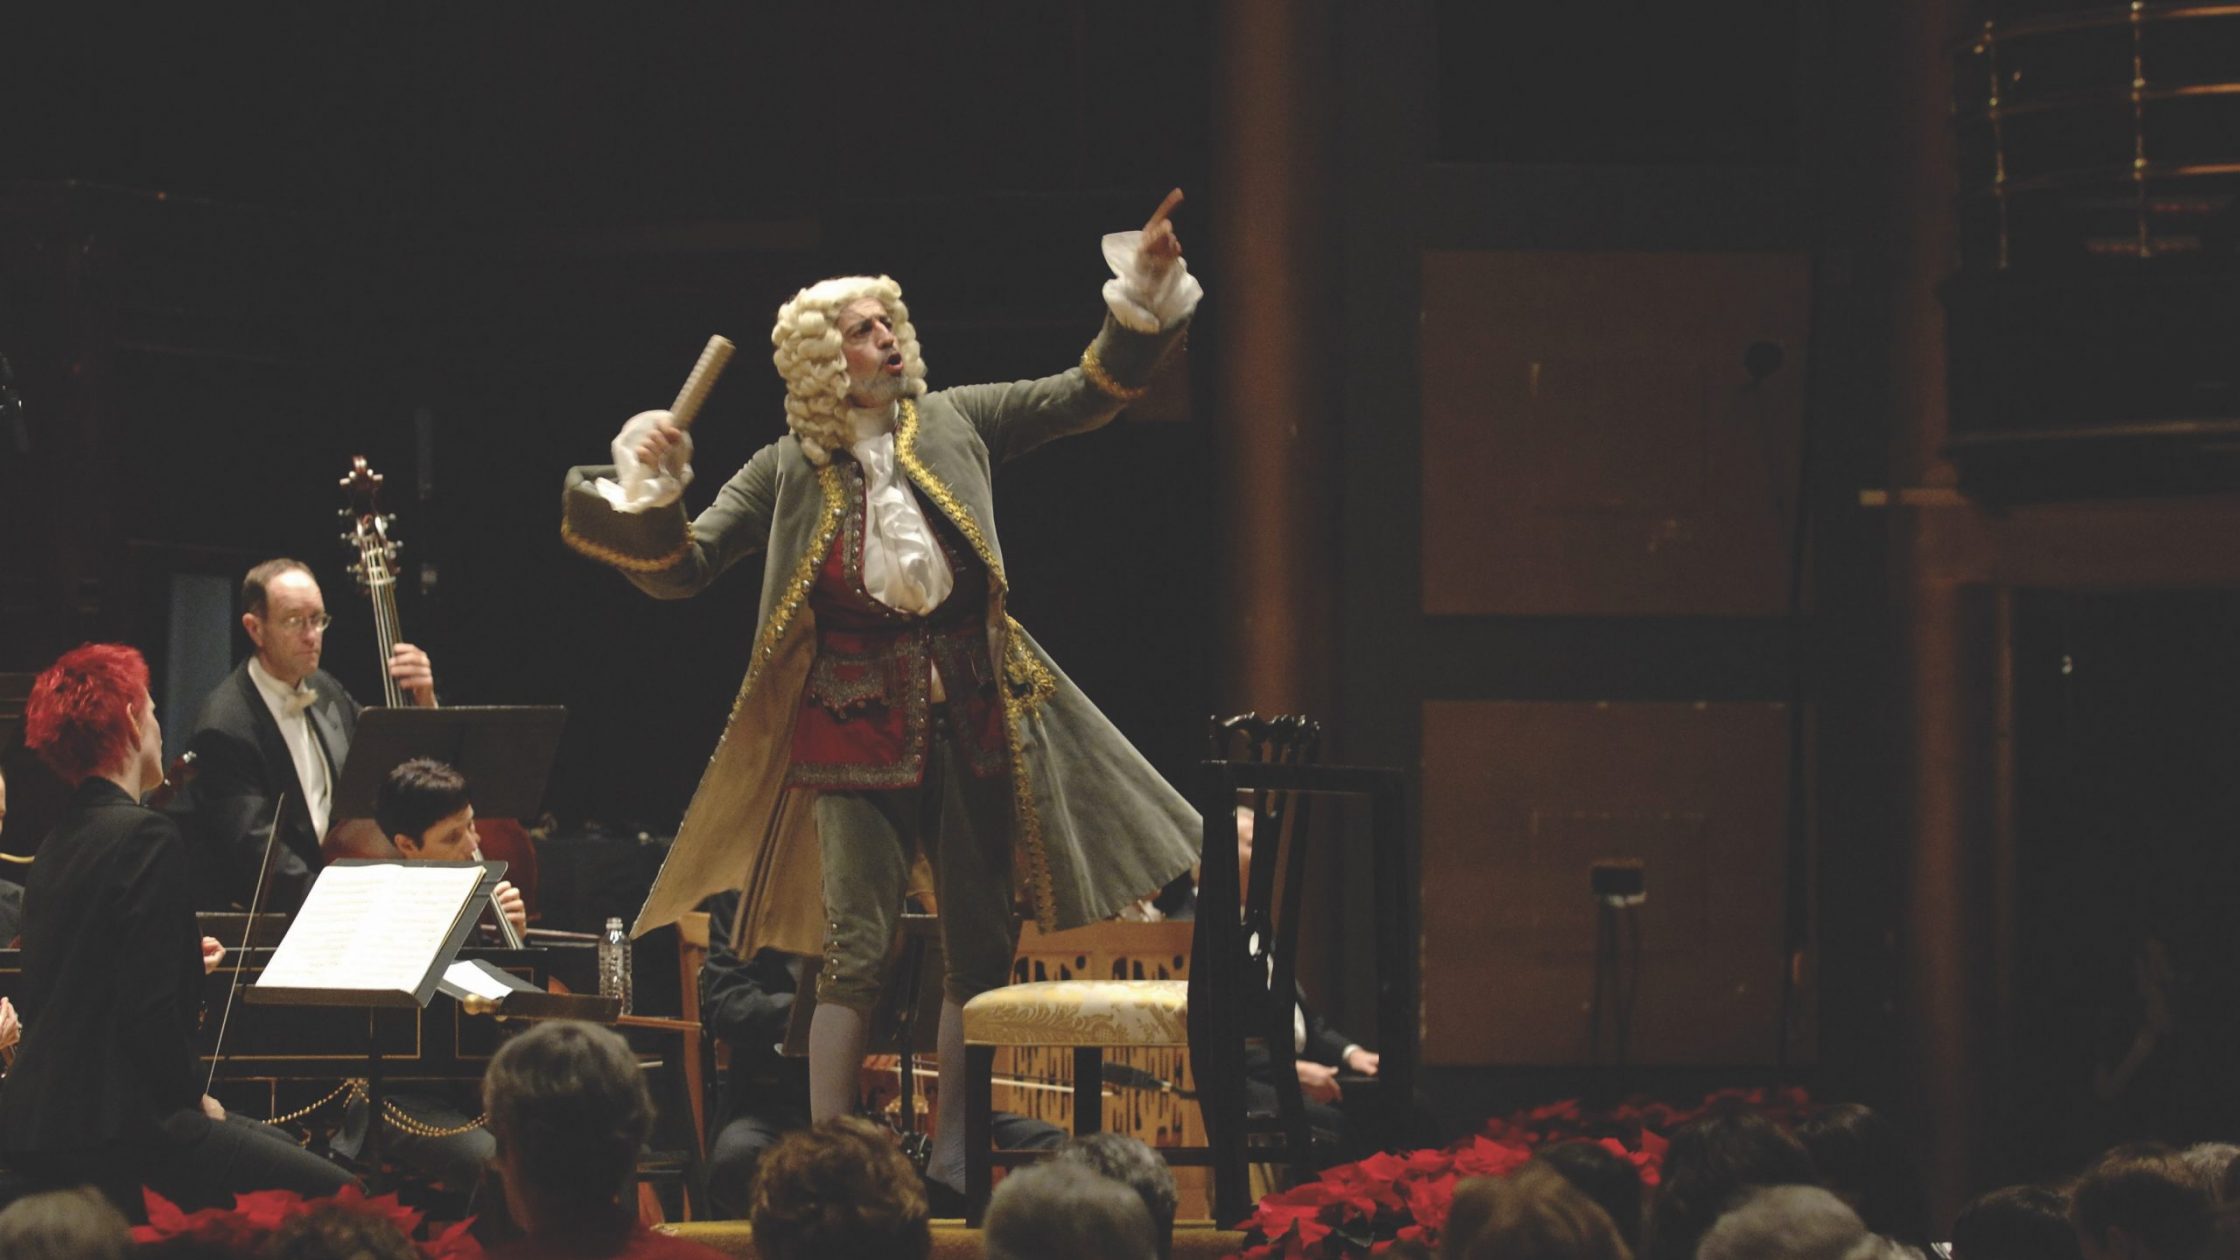 man dressed as Handel conducts